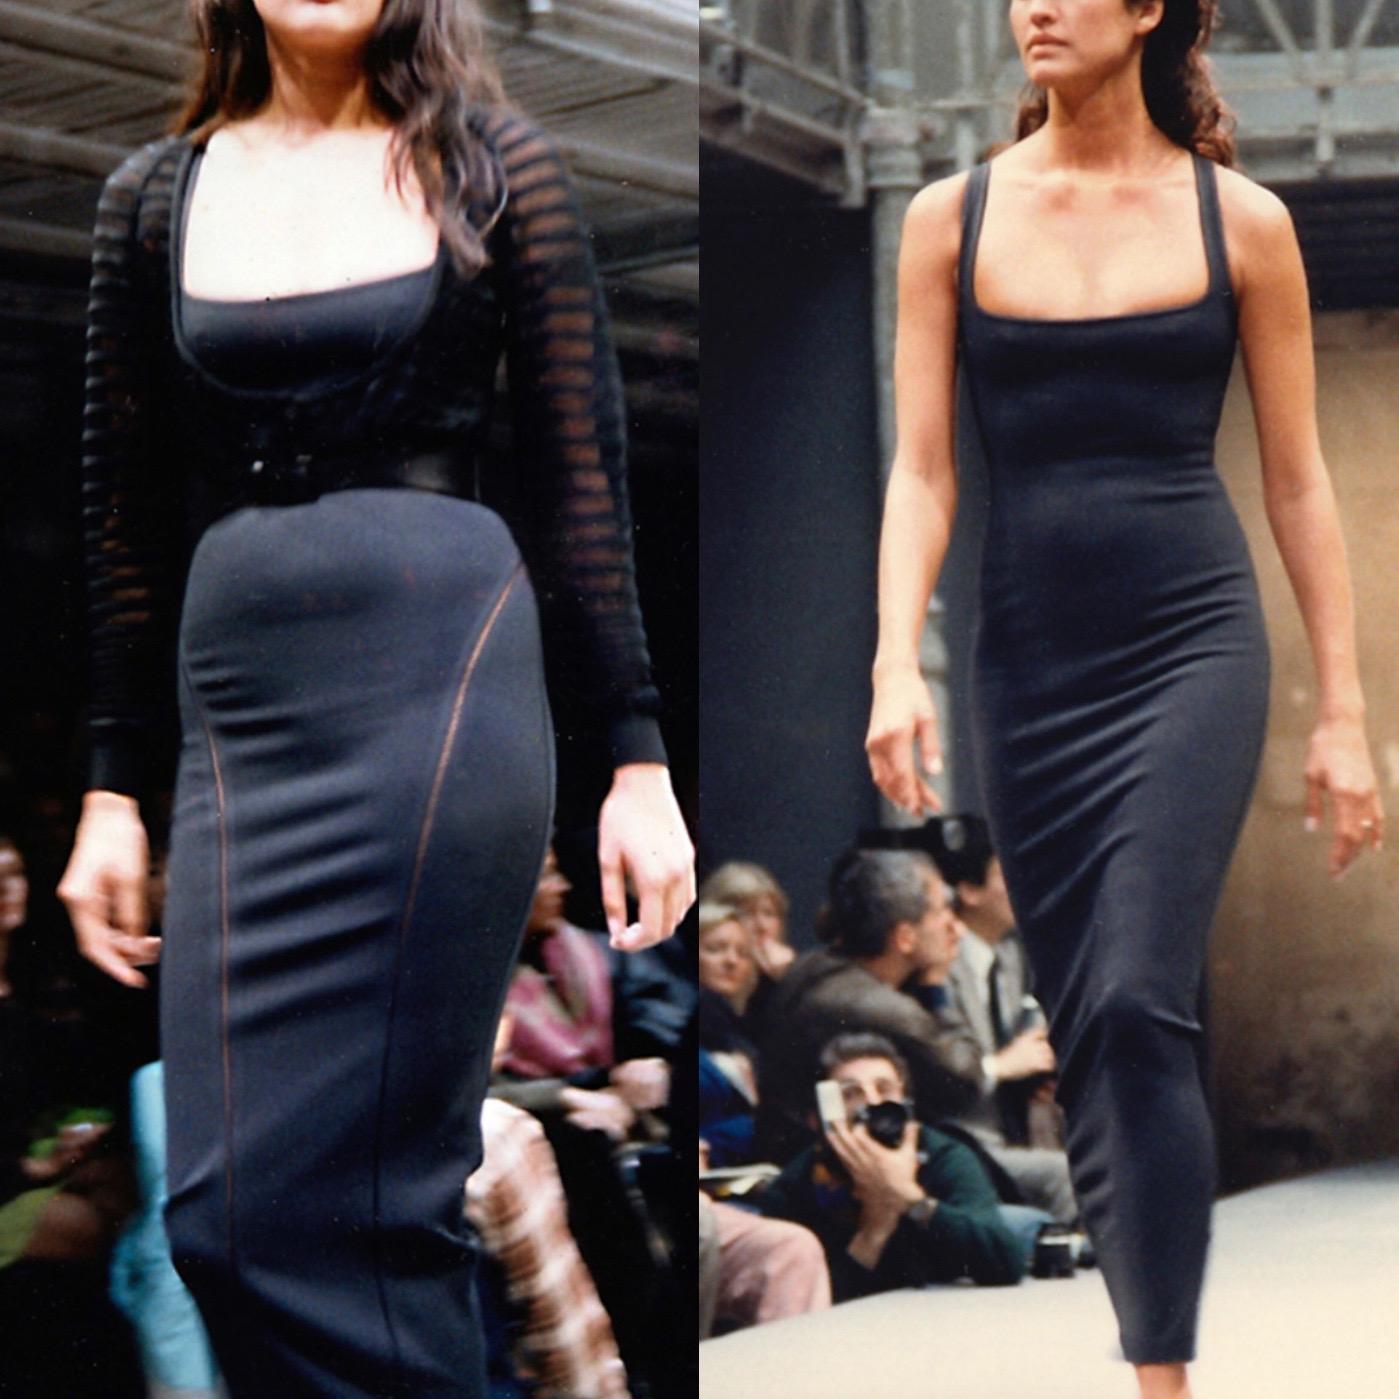 The perfect black dress from Alaïa’s Spring Summer 1988 collection . Azzedine Alaïa gained his reputation by creating sleek dresses that hug the body, this dress is the ideal example of his iconic style.

So chic. This stretch ankle-length dress has